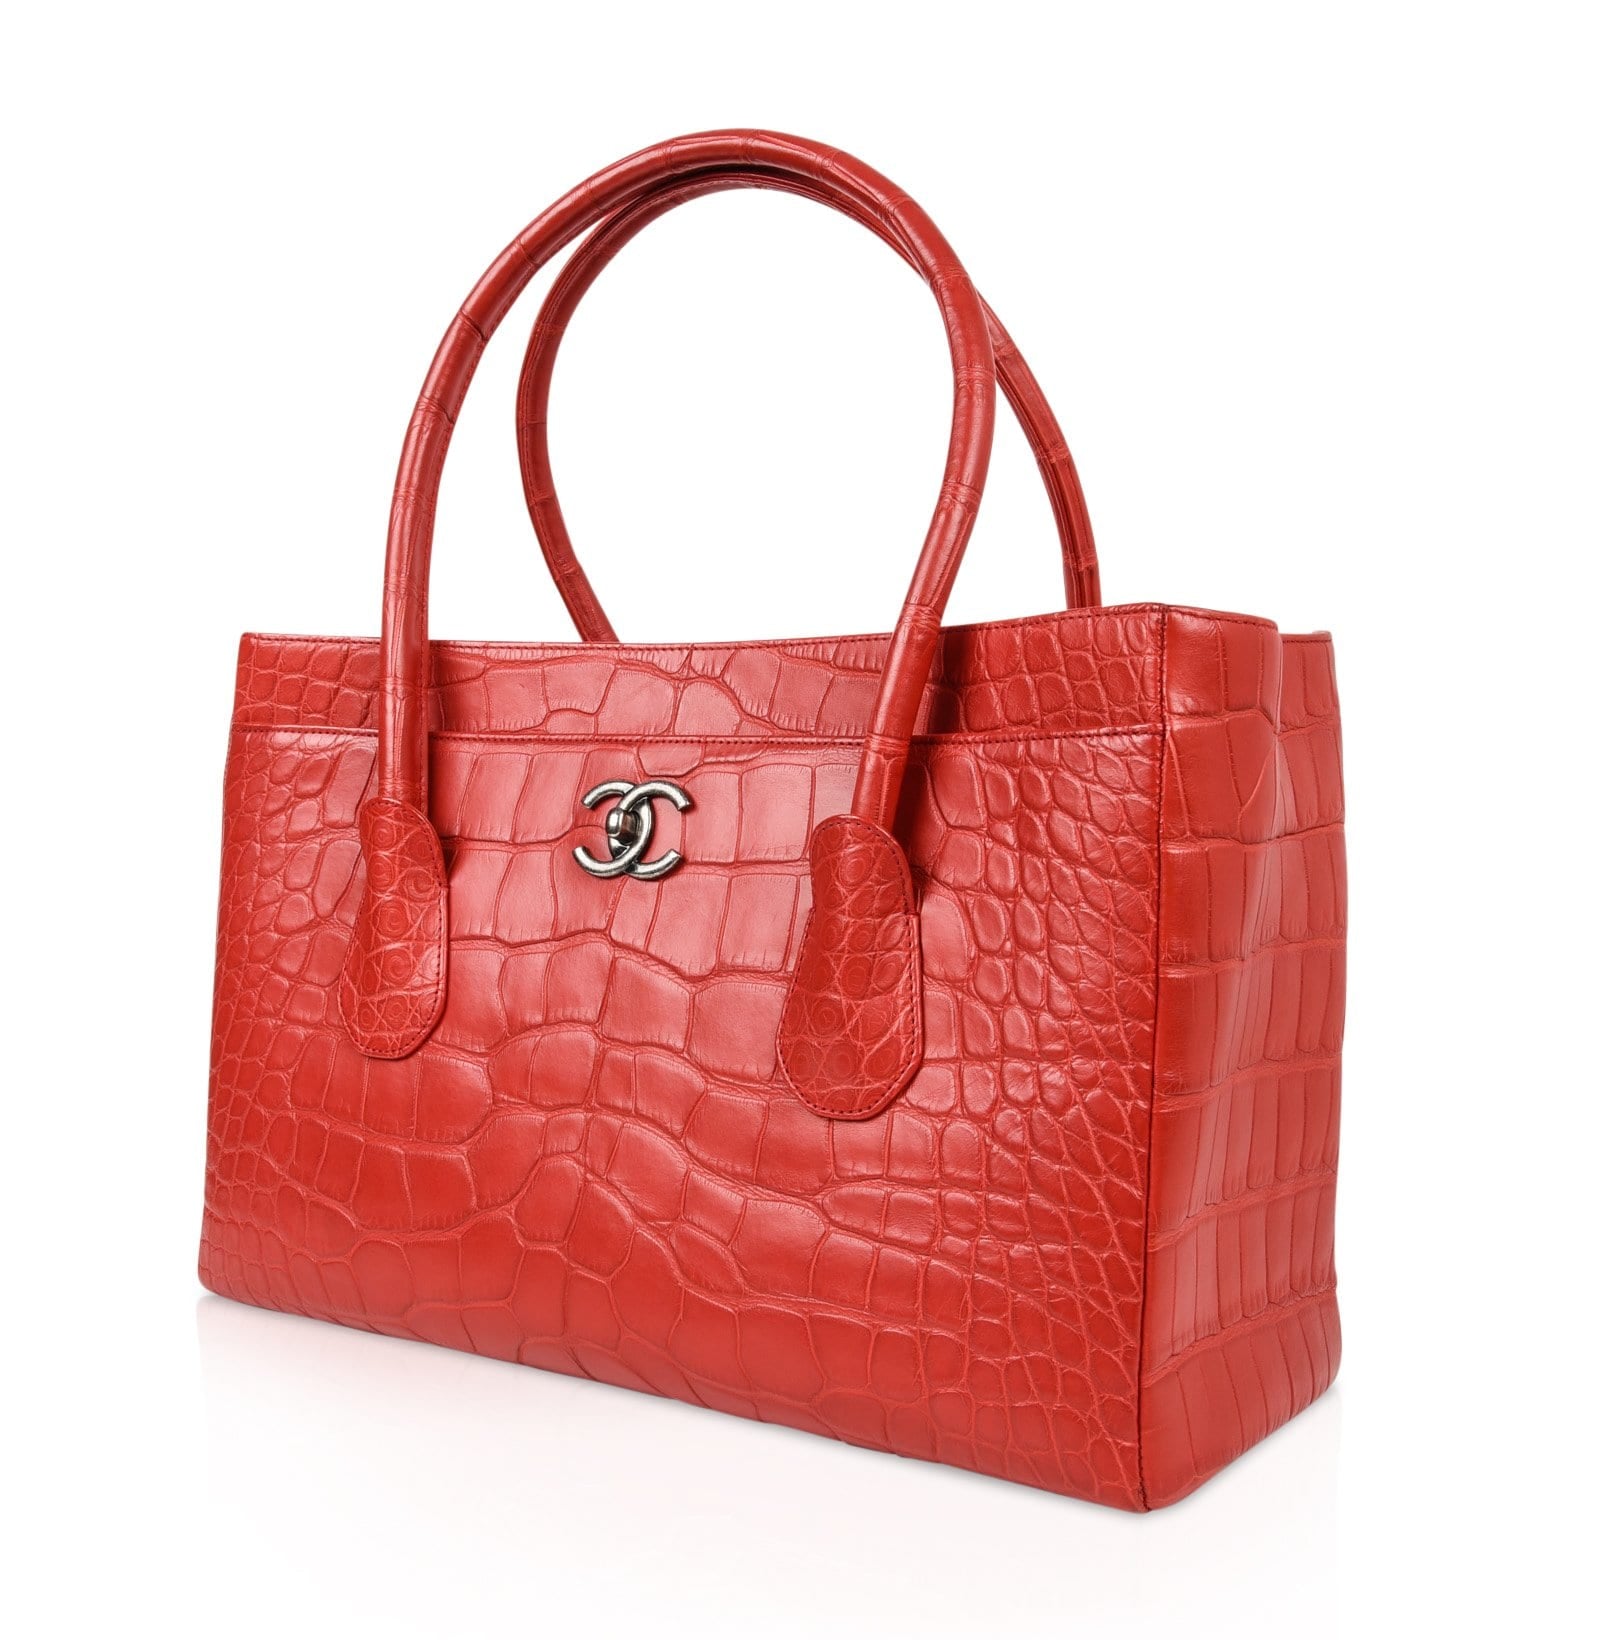 Chanel Large Fantasy Tweed Quilted Tote - Vintage Lux